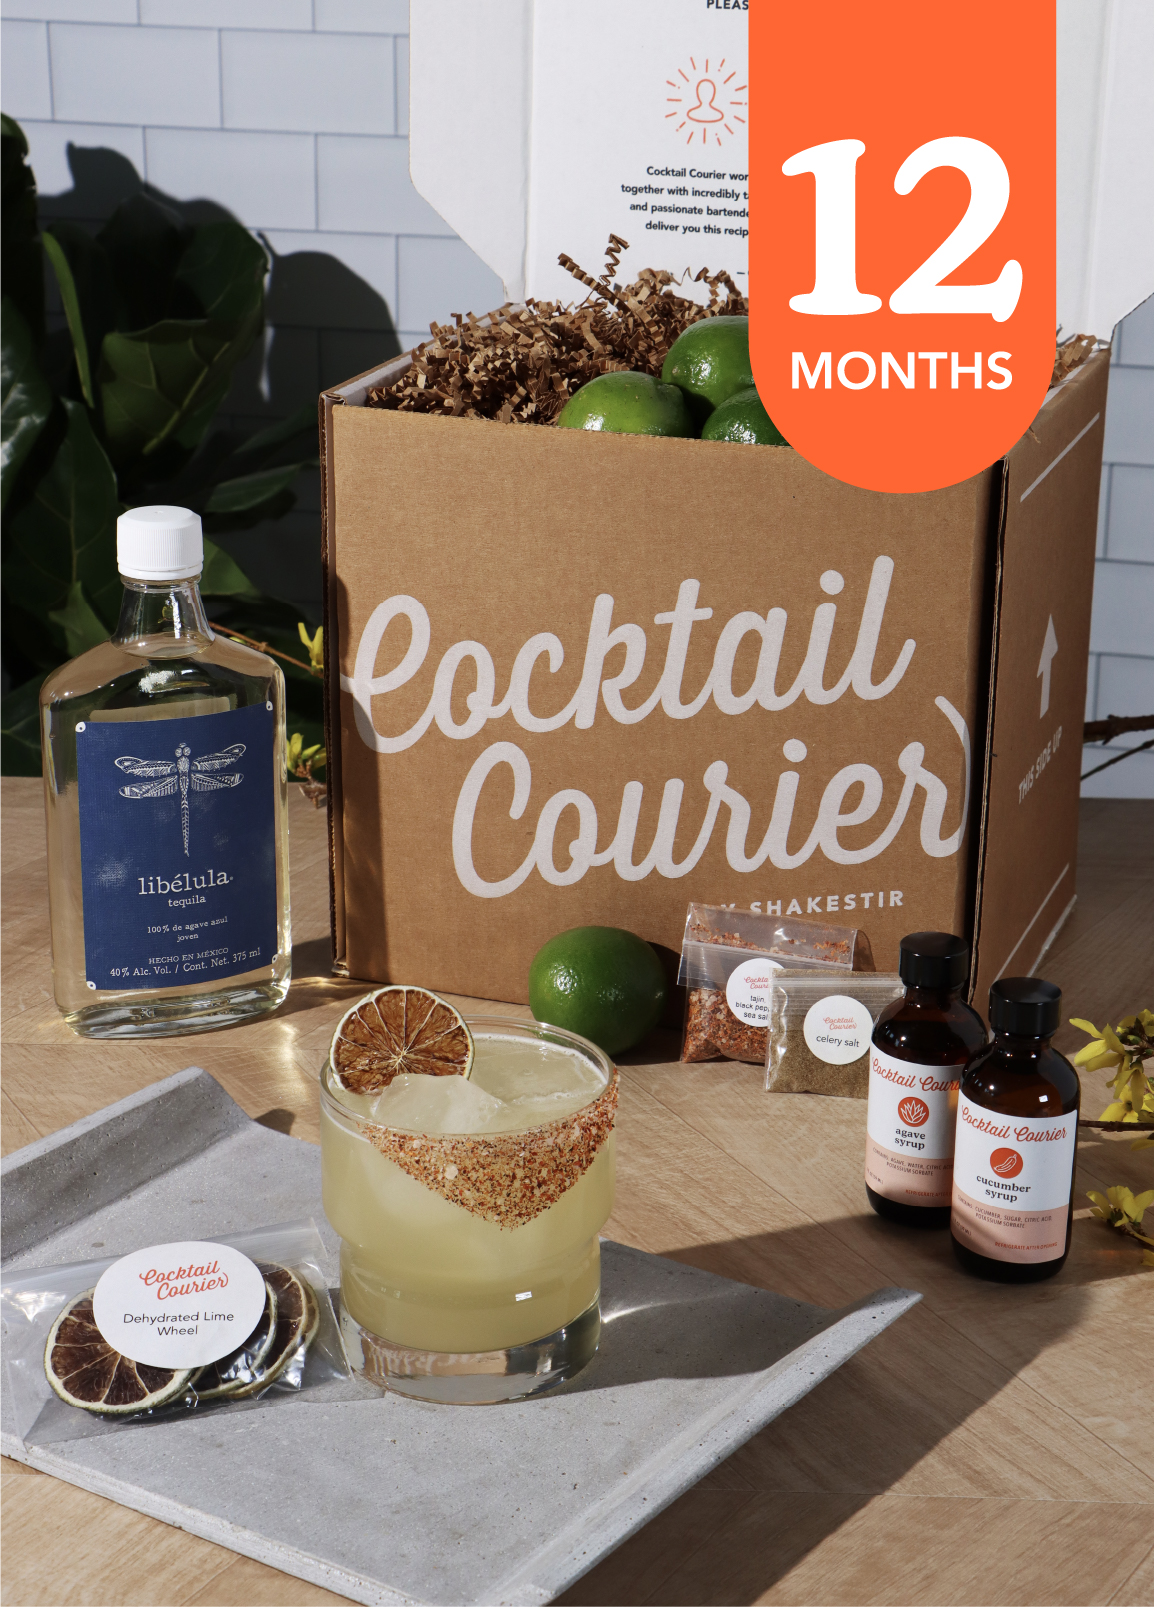 Cocktail box with tequila and syrups and lemon with a refreshing looking cocktail and text with a 12month referring to the choice.